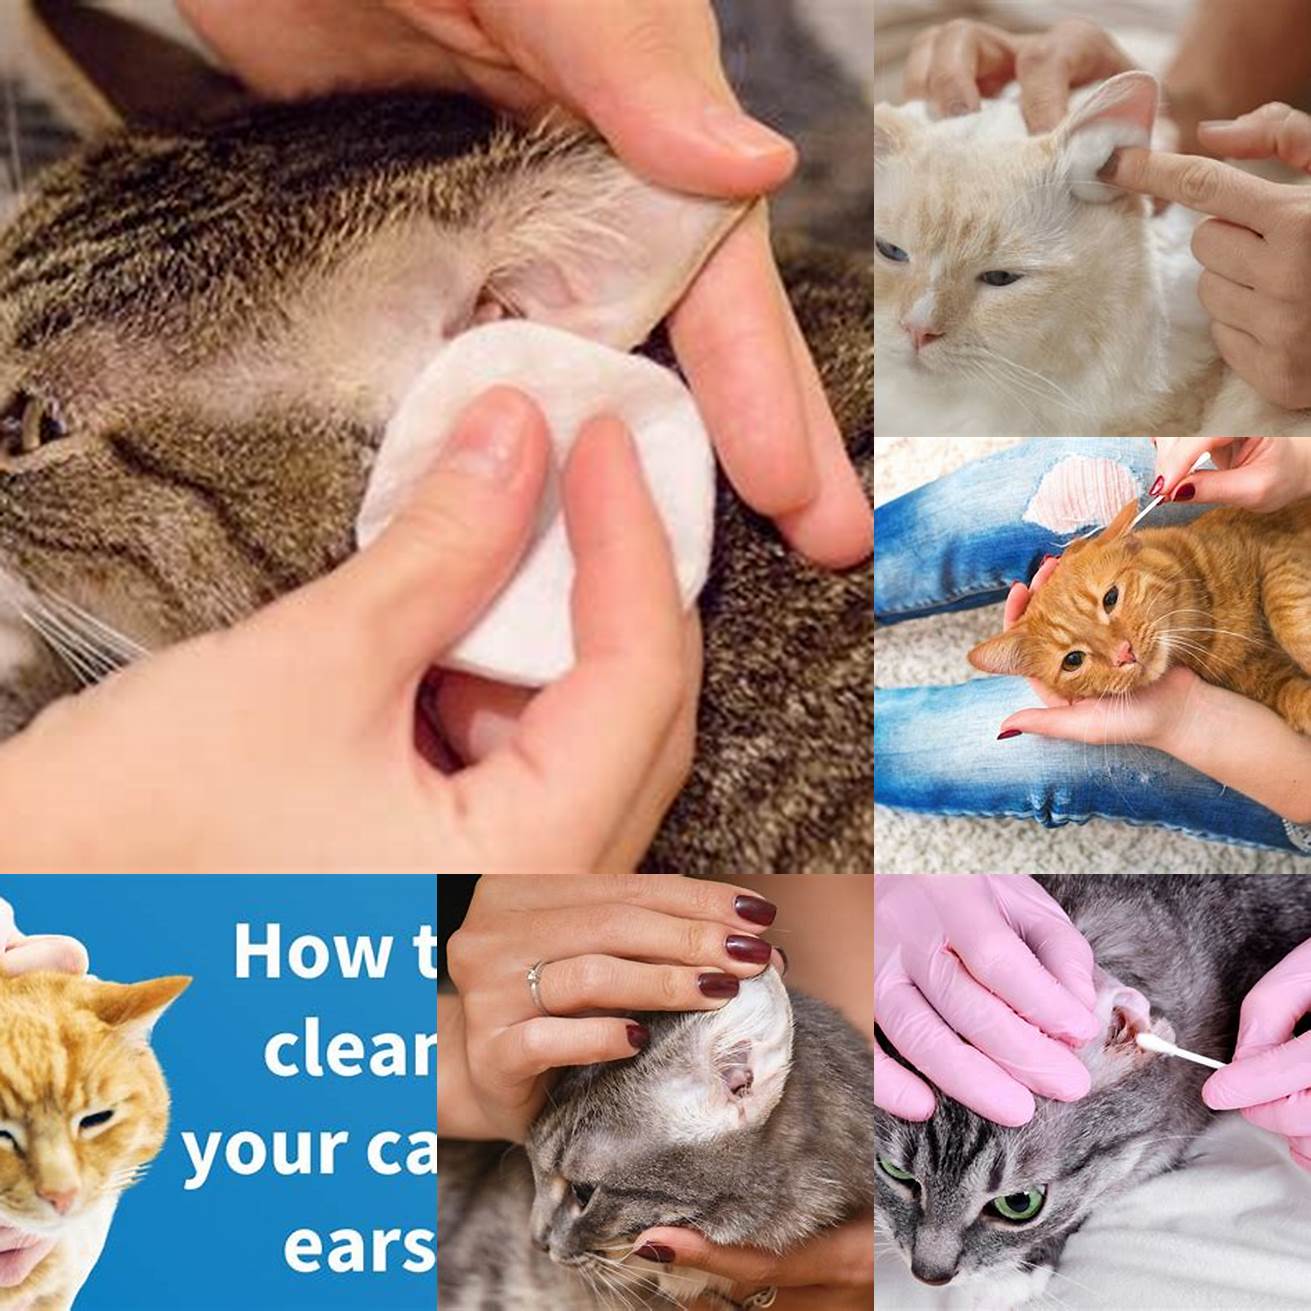 Ensure your cats ear is clean and dry